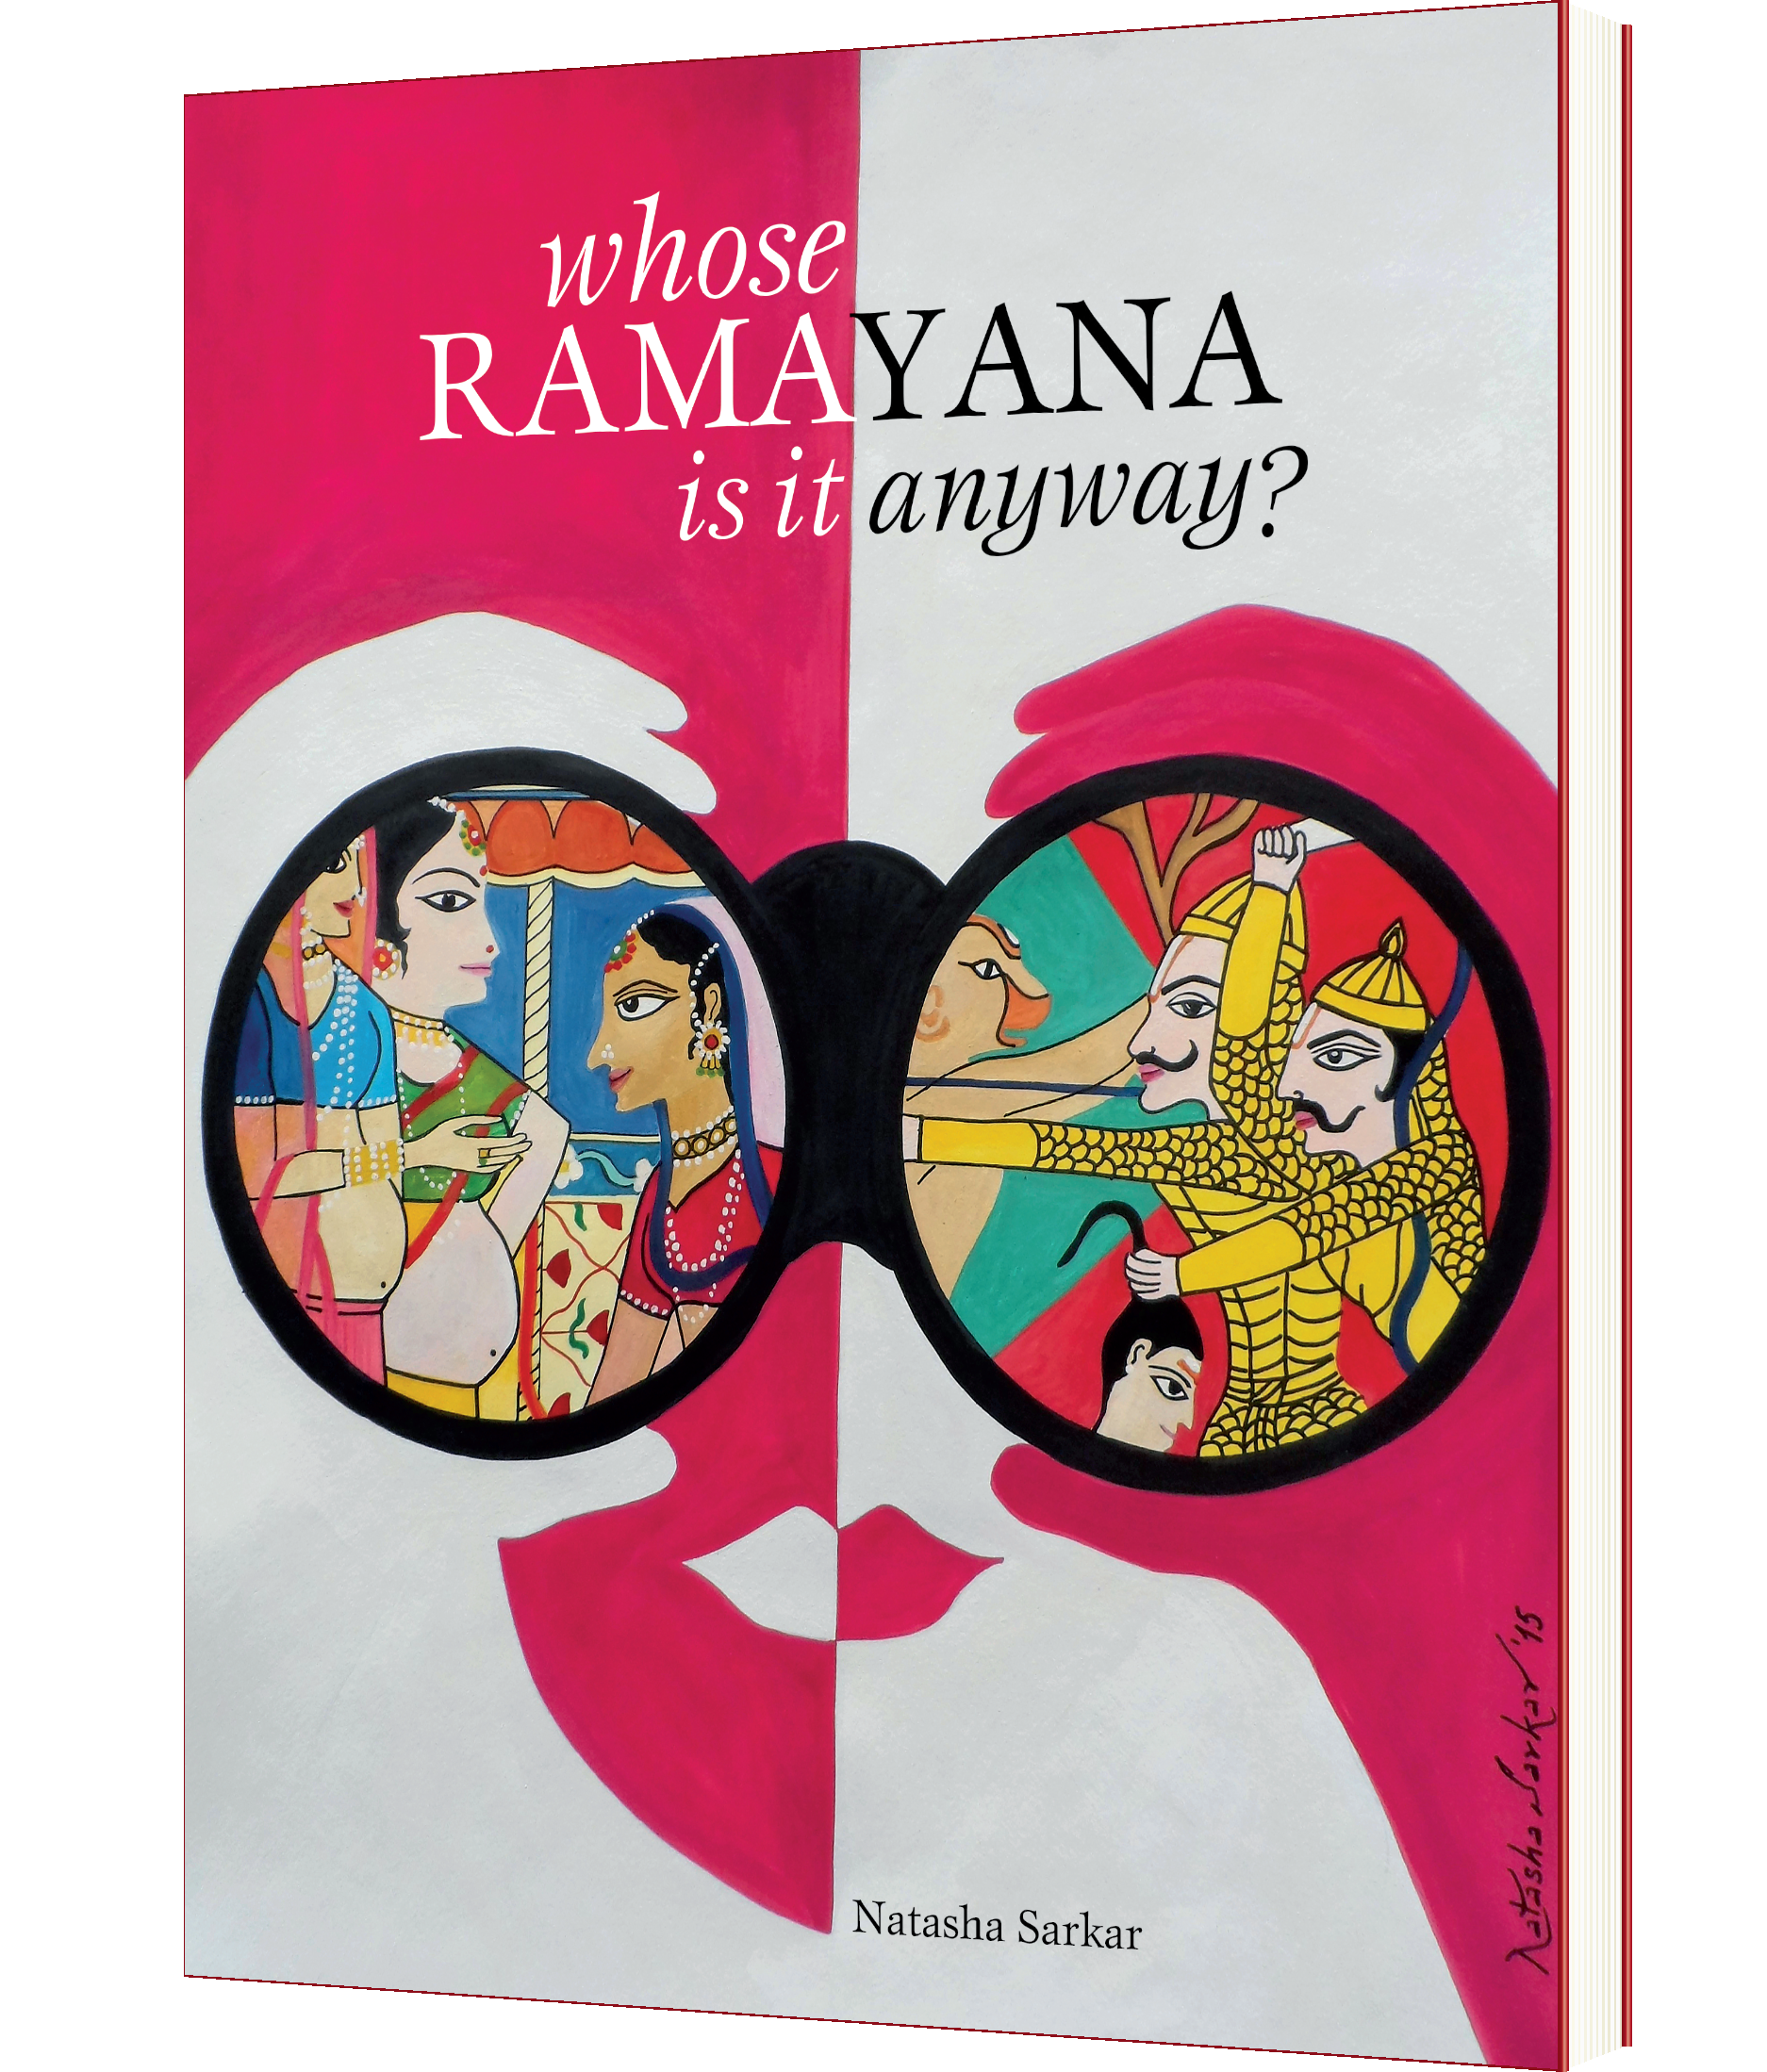 Whose RAMAYANA is it anyway?